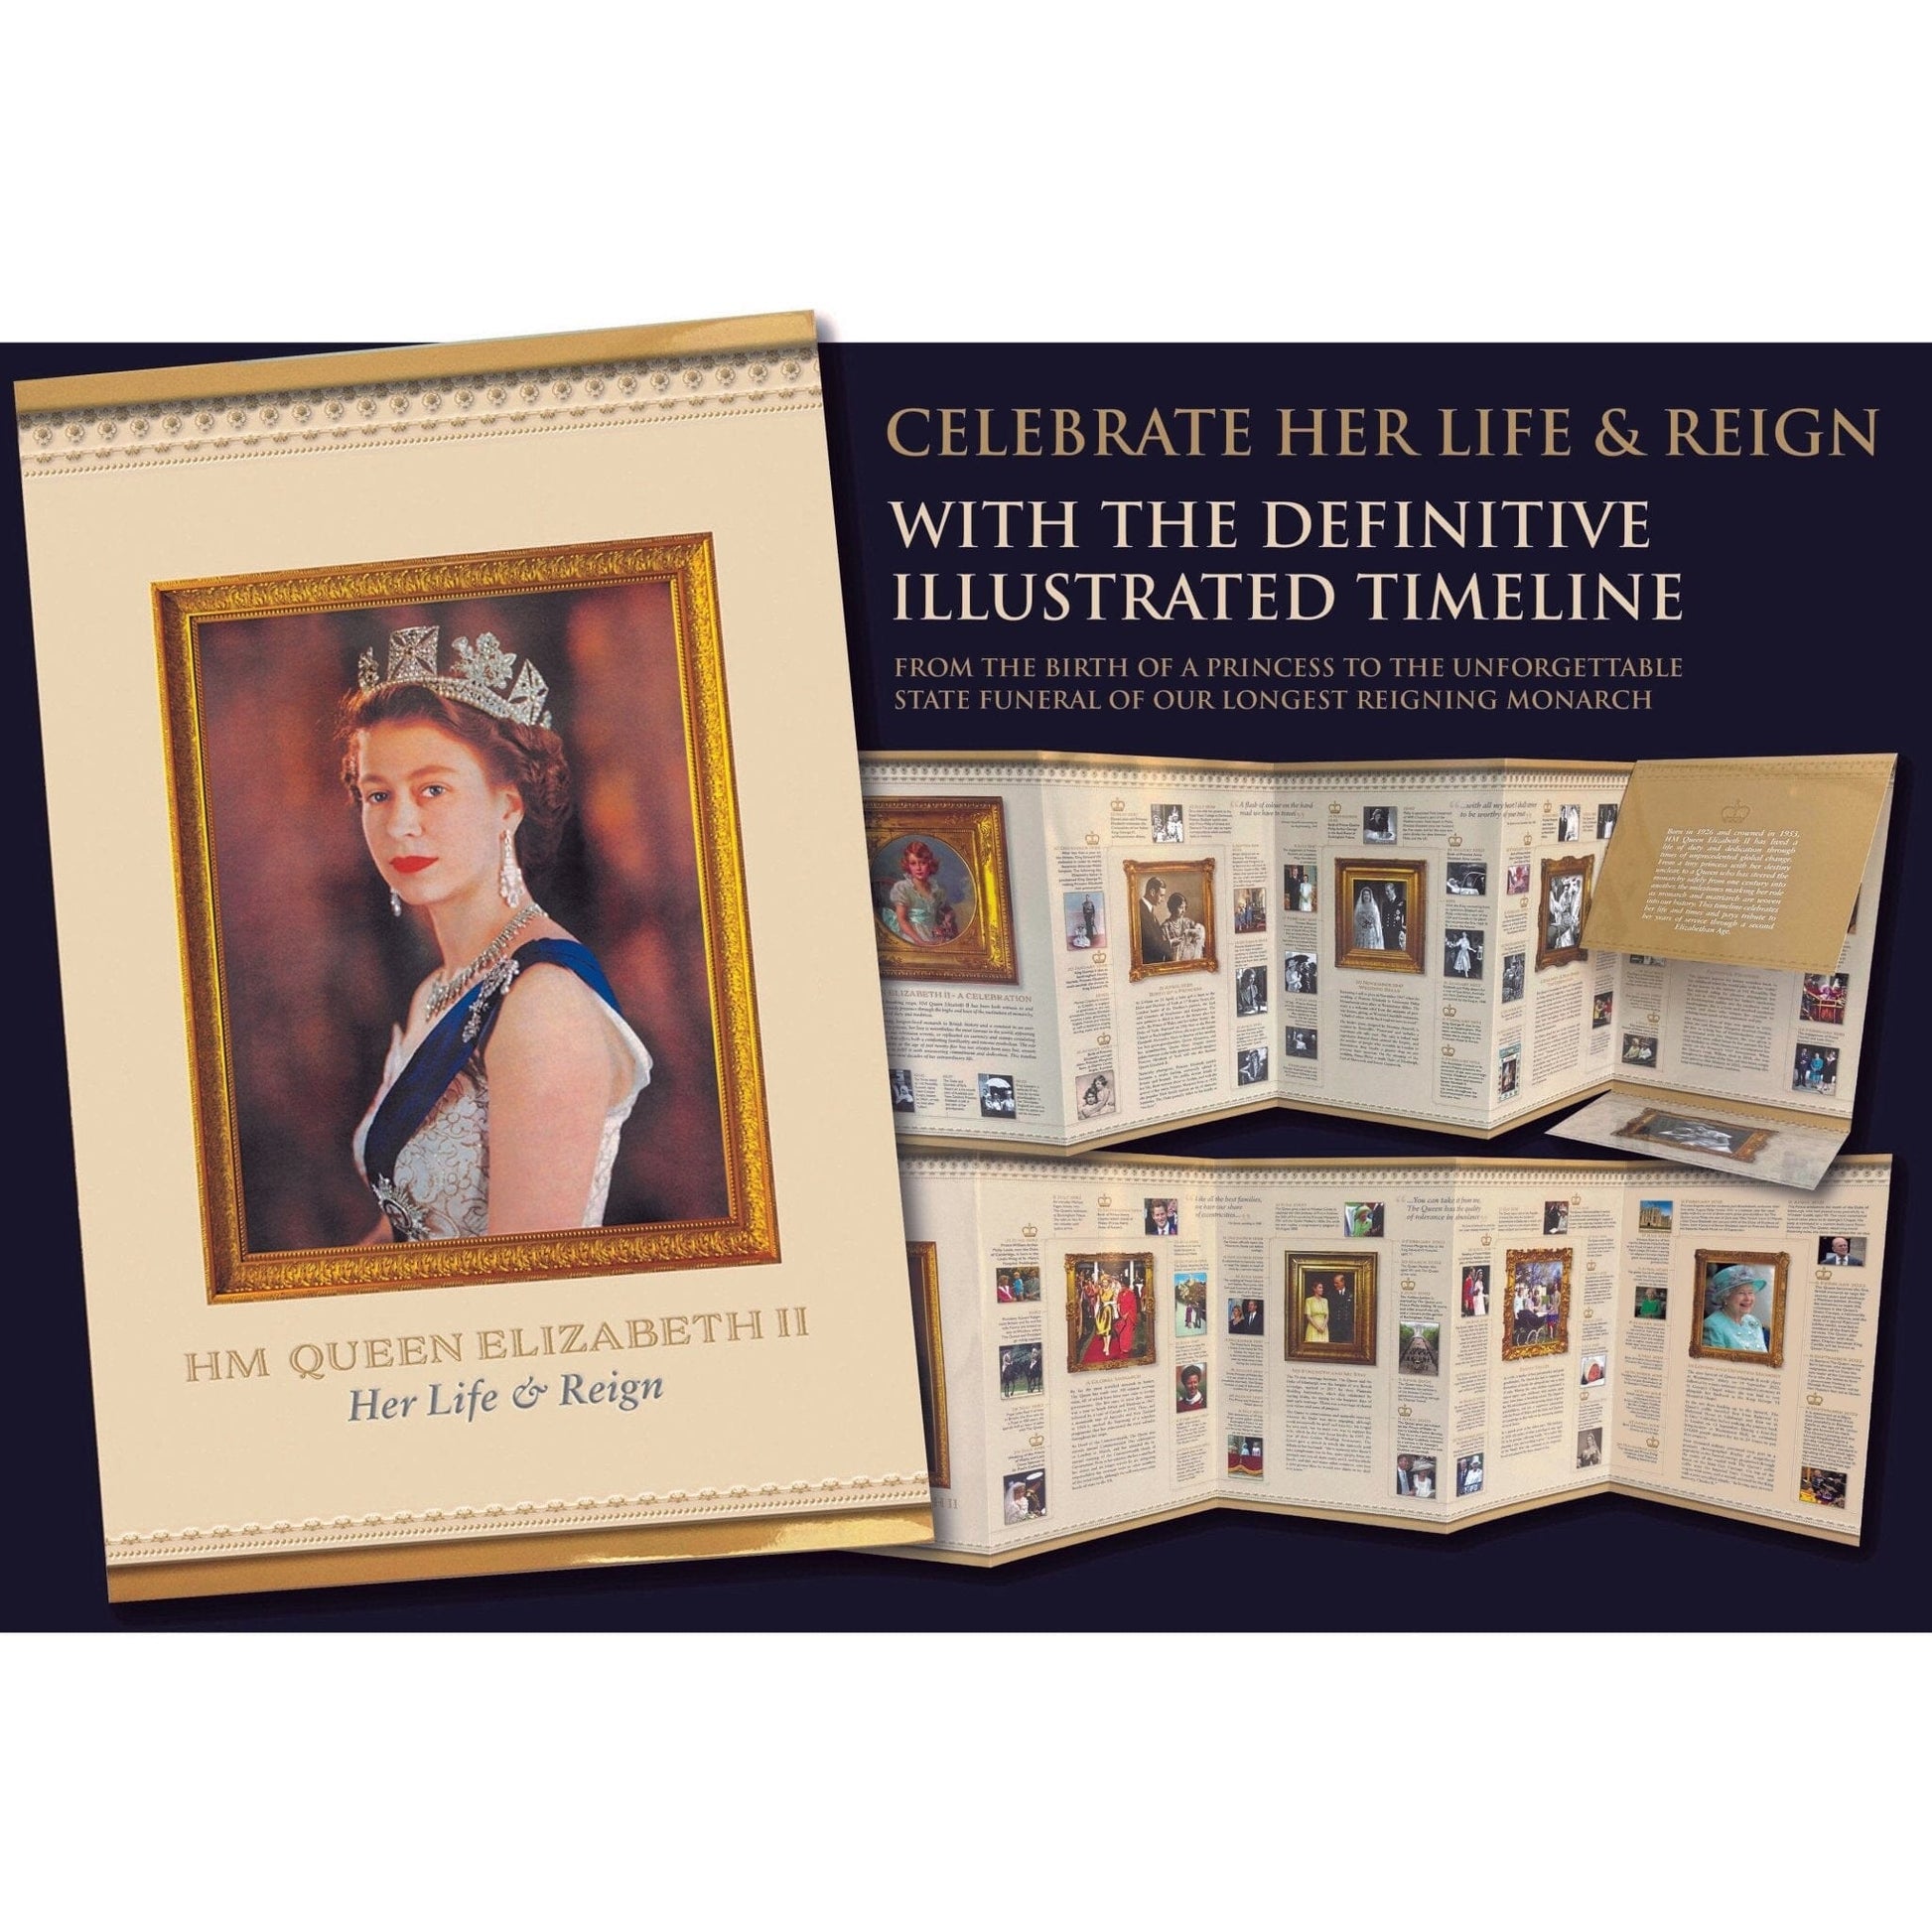 H.M. Queen Elizabeth II Timeline Books ABF The Soldiers' Charity Shop 